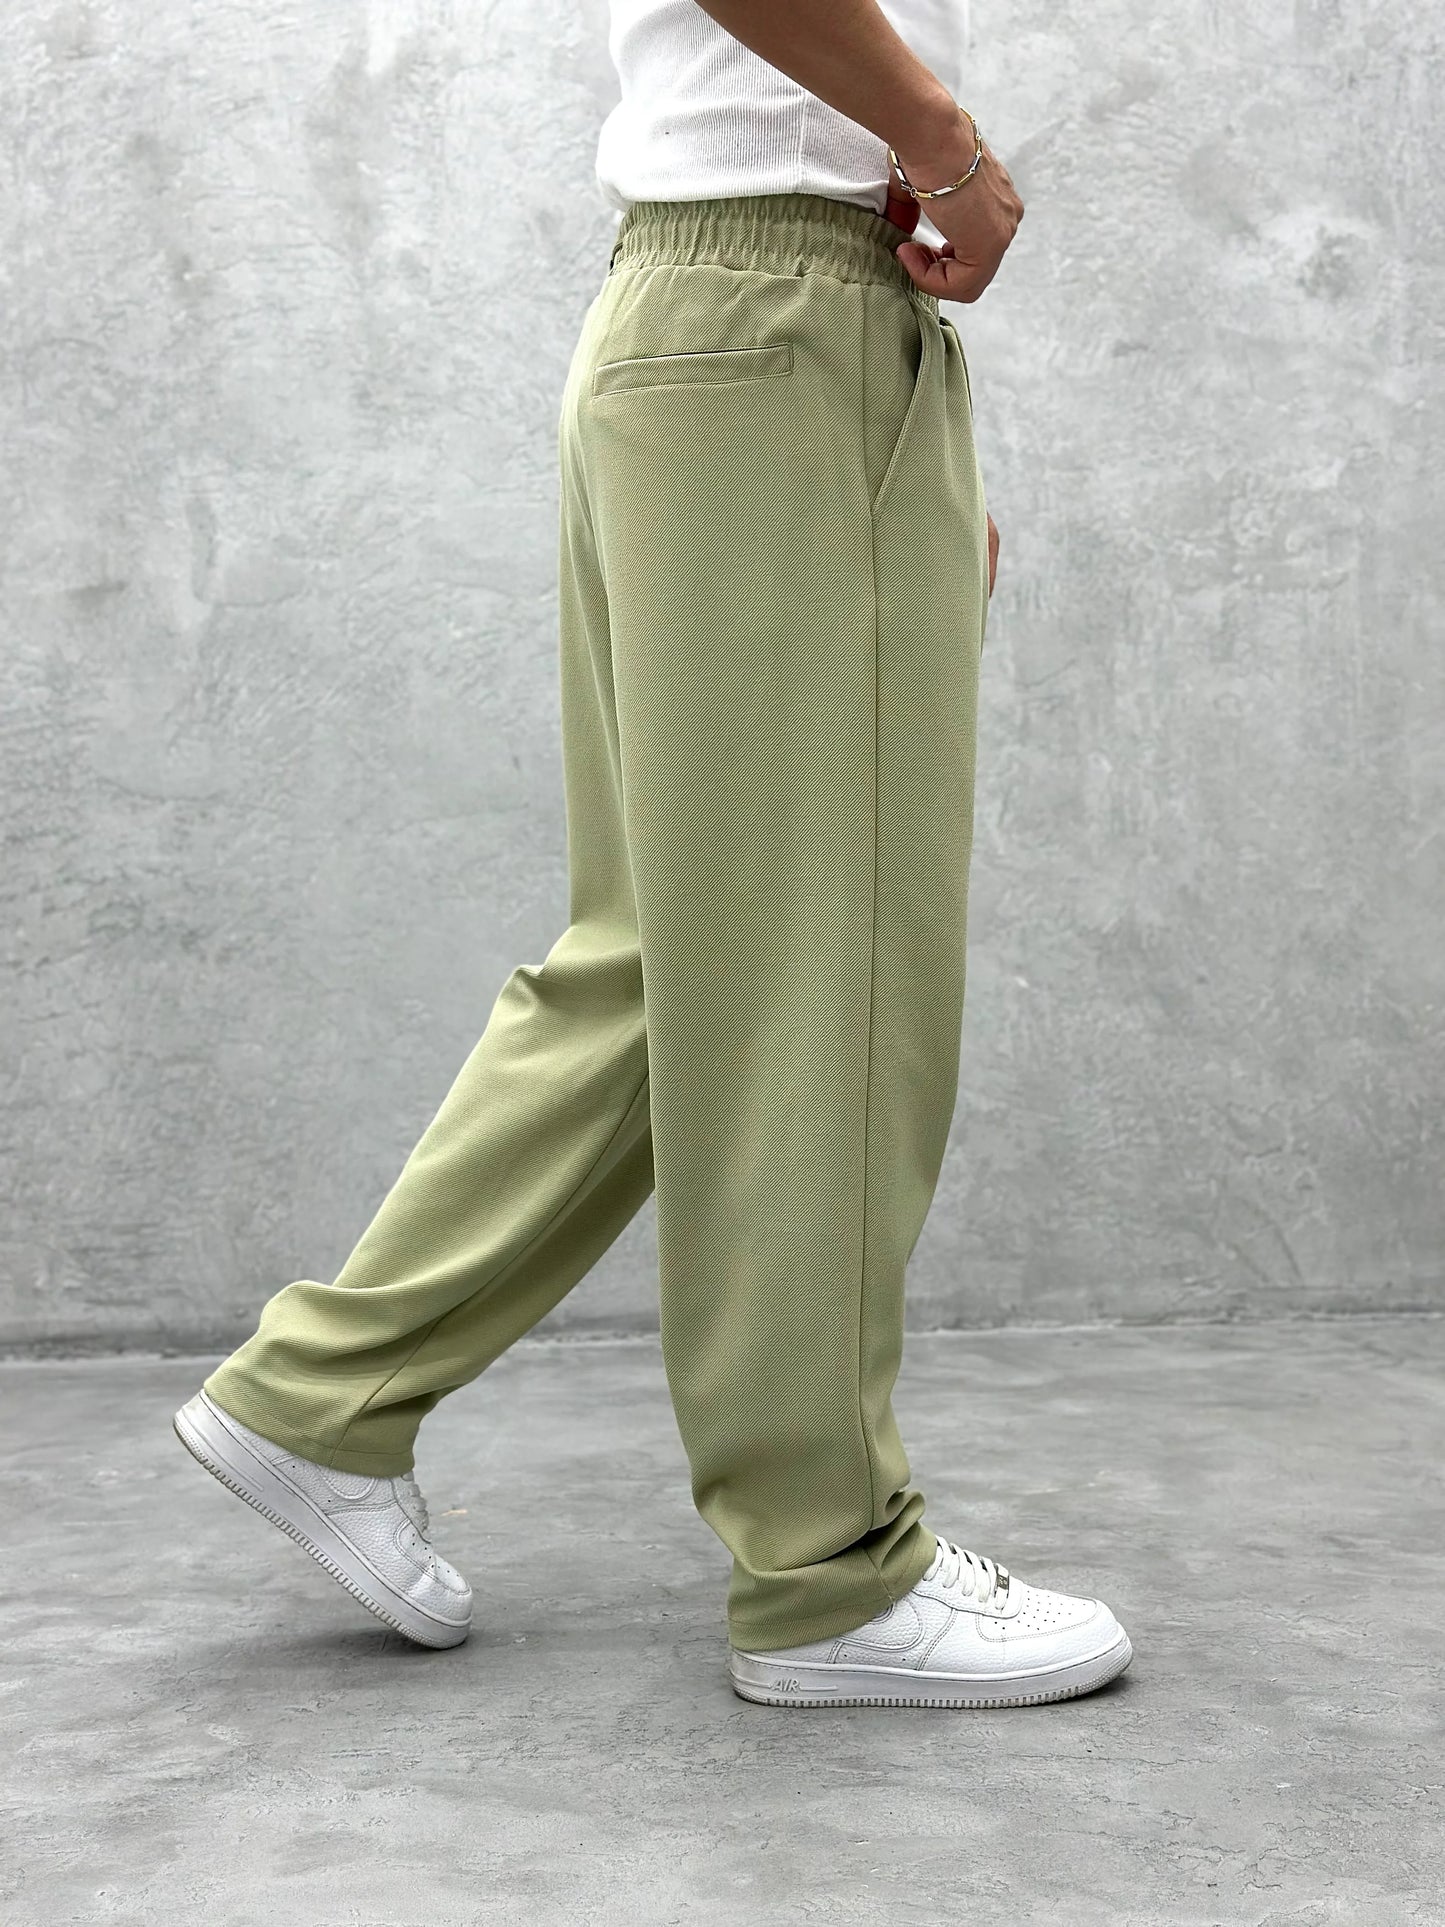 Comfortable Light Green Lined Pants